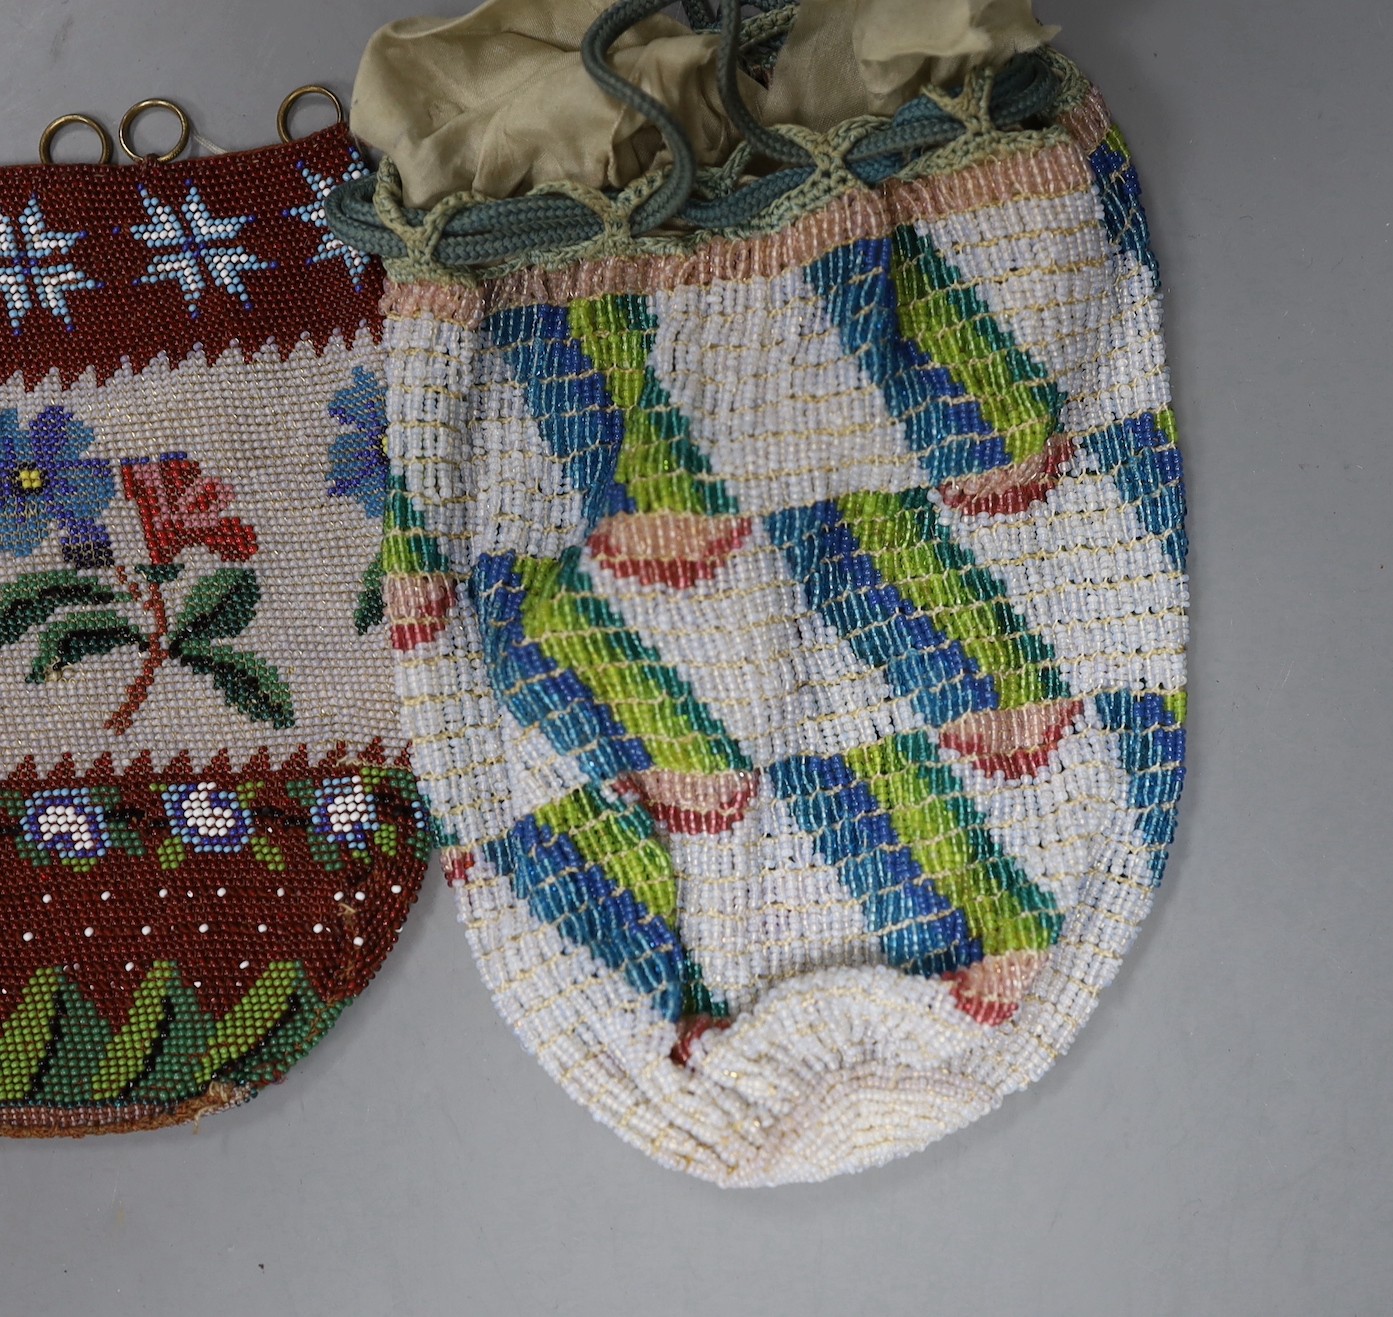 A 19th century bead worked bag with sailing ship design, a similar floral bead worked bag and a 1920’s-30’s abstract bead worked bag